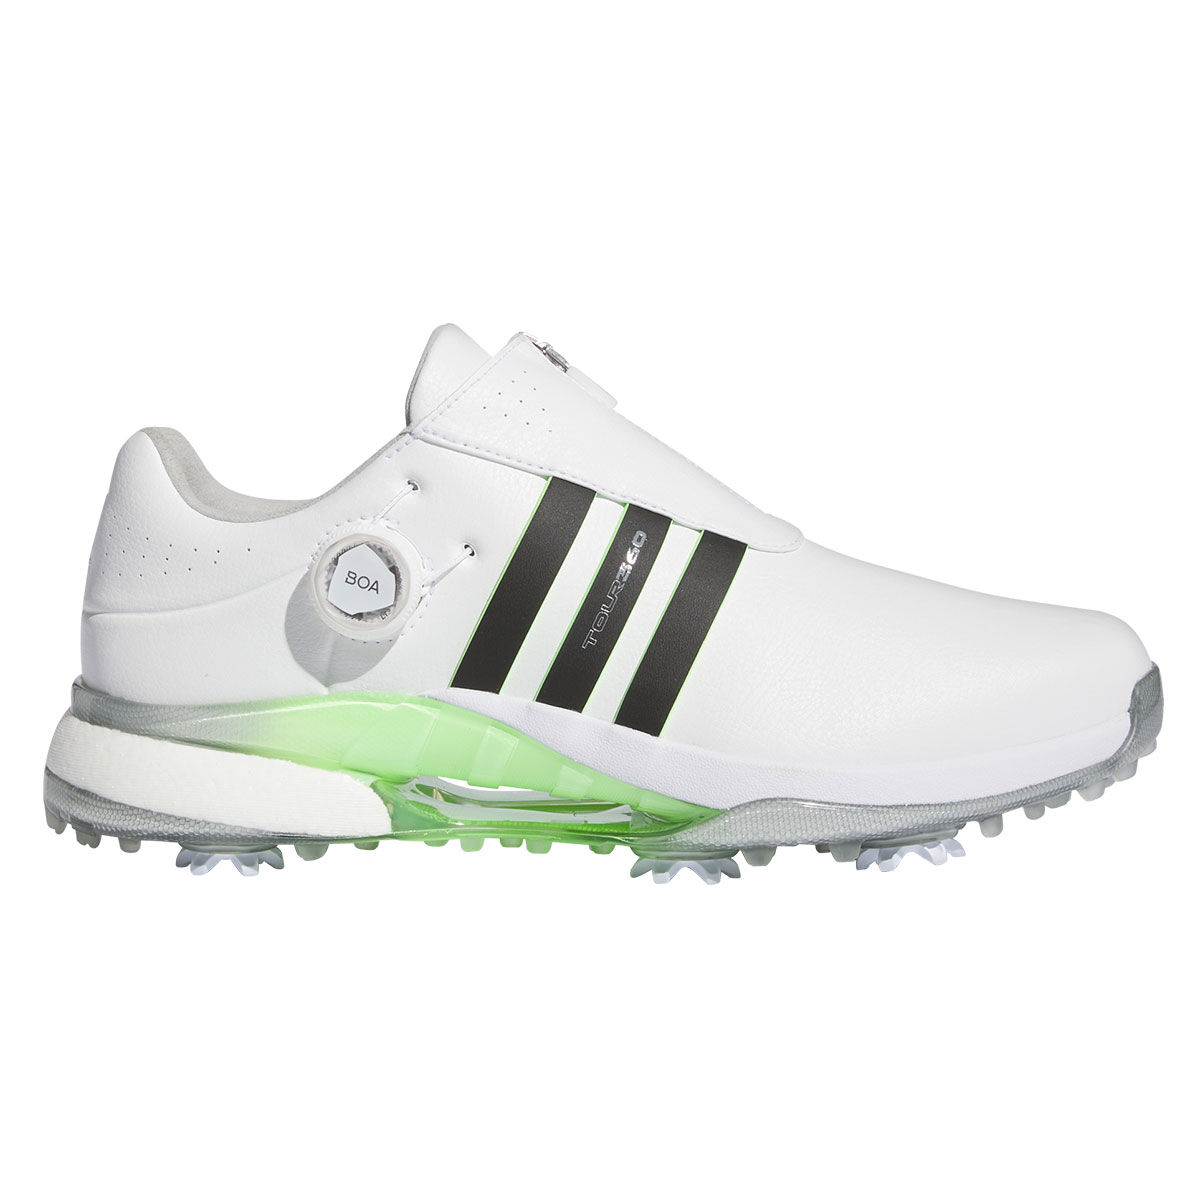 adidas Men’s Tour360 24 BOA Boost Waterproof Spiked Golf Shoes, Mens, White/core black/green spark, 8 | American Golf